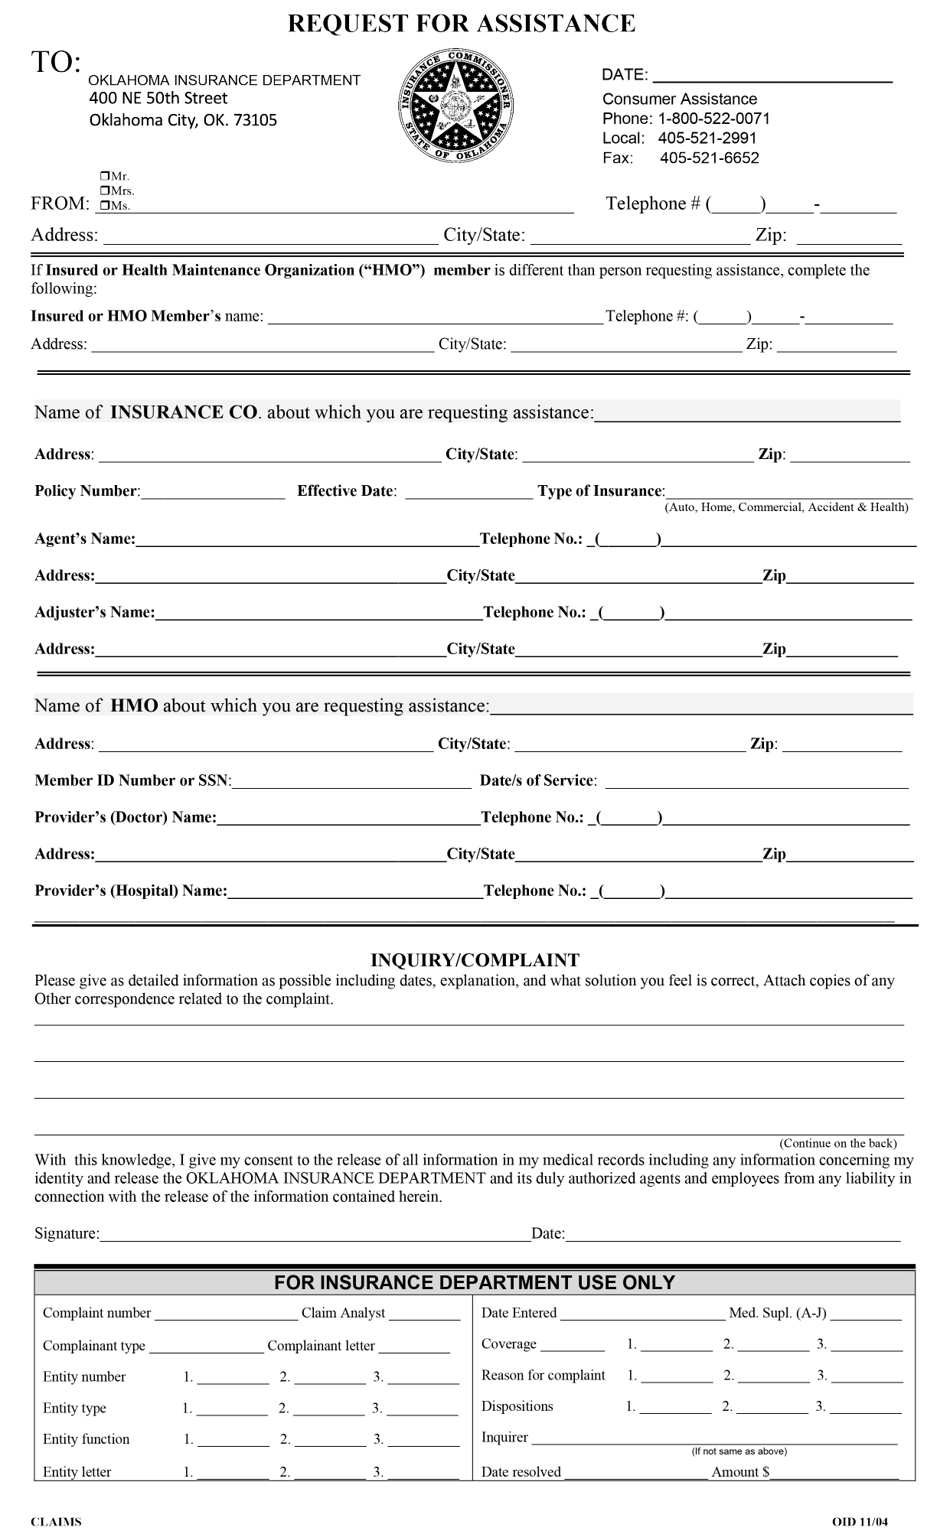 Request for Assistance - Oklahoma, Page 1